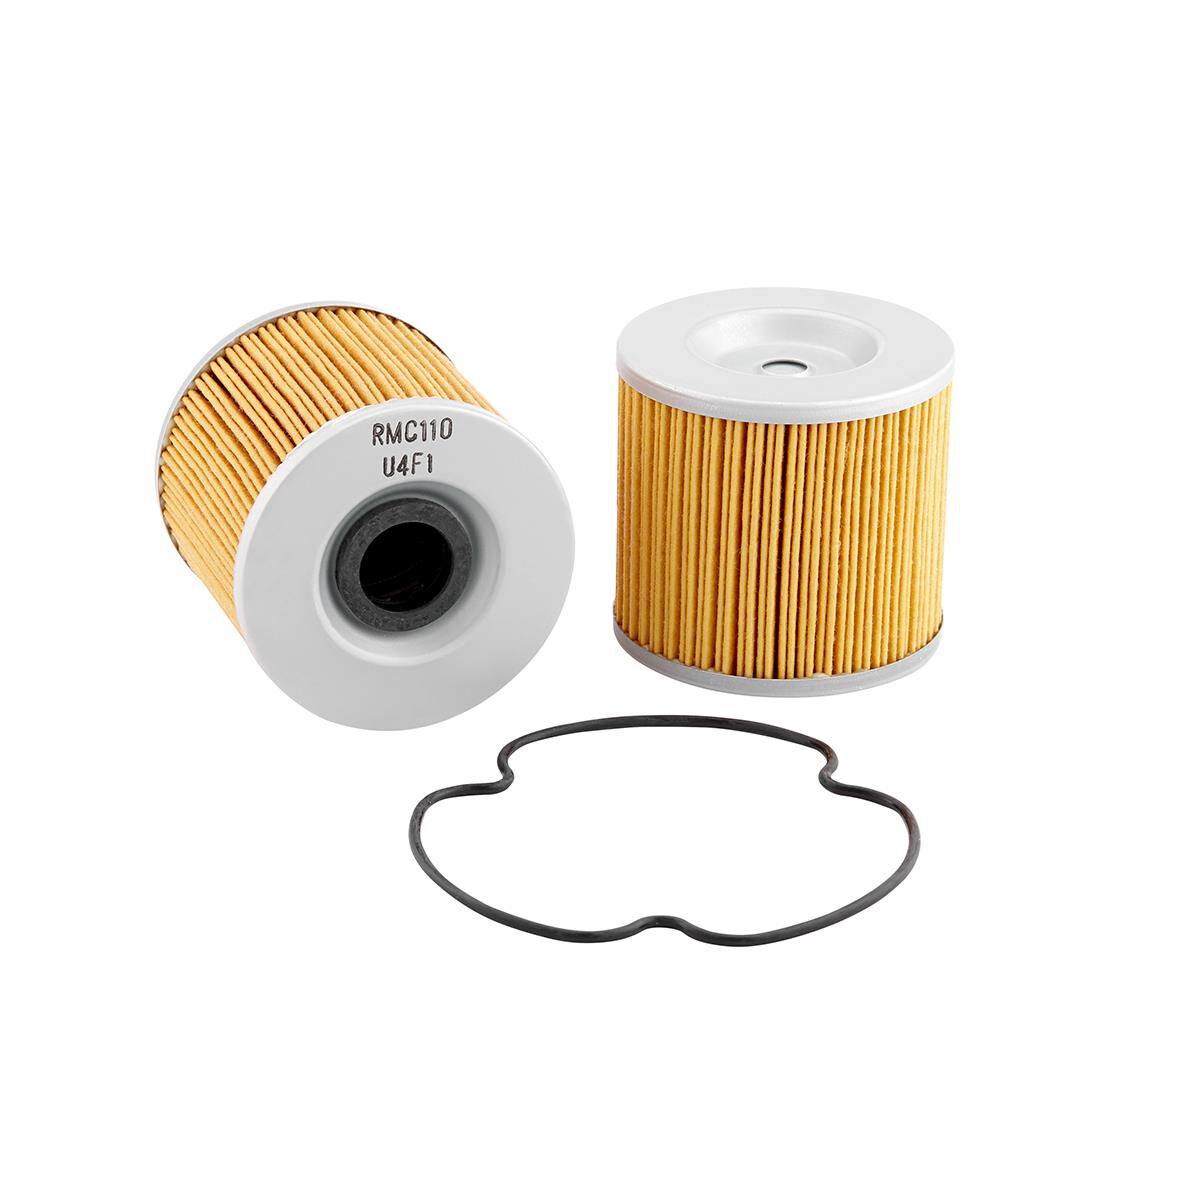 RYCO MOTORCYCLE OIL FILTER - RMC110, , scaau_hi-res